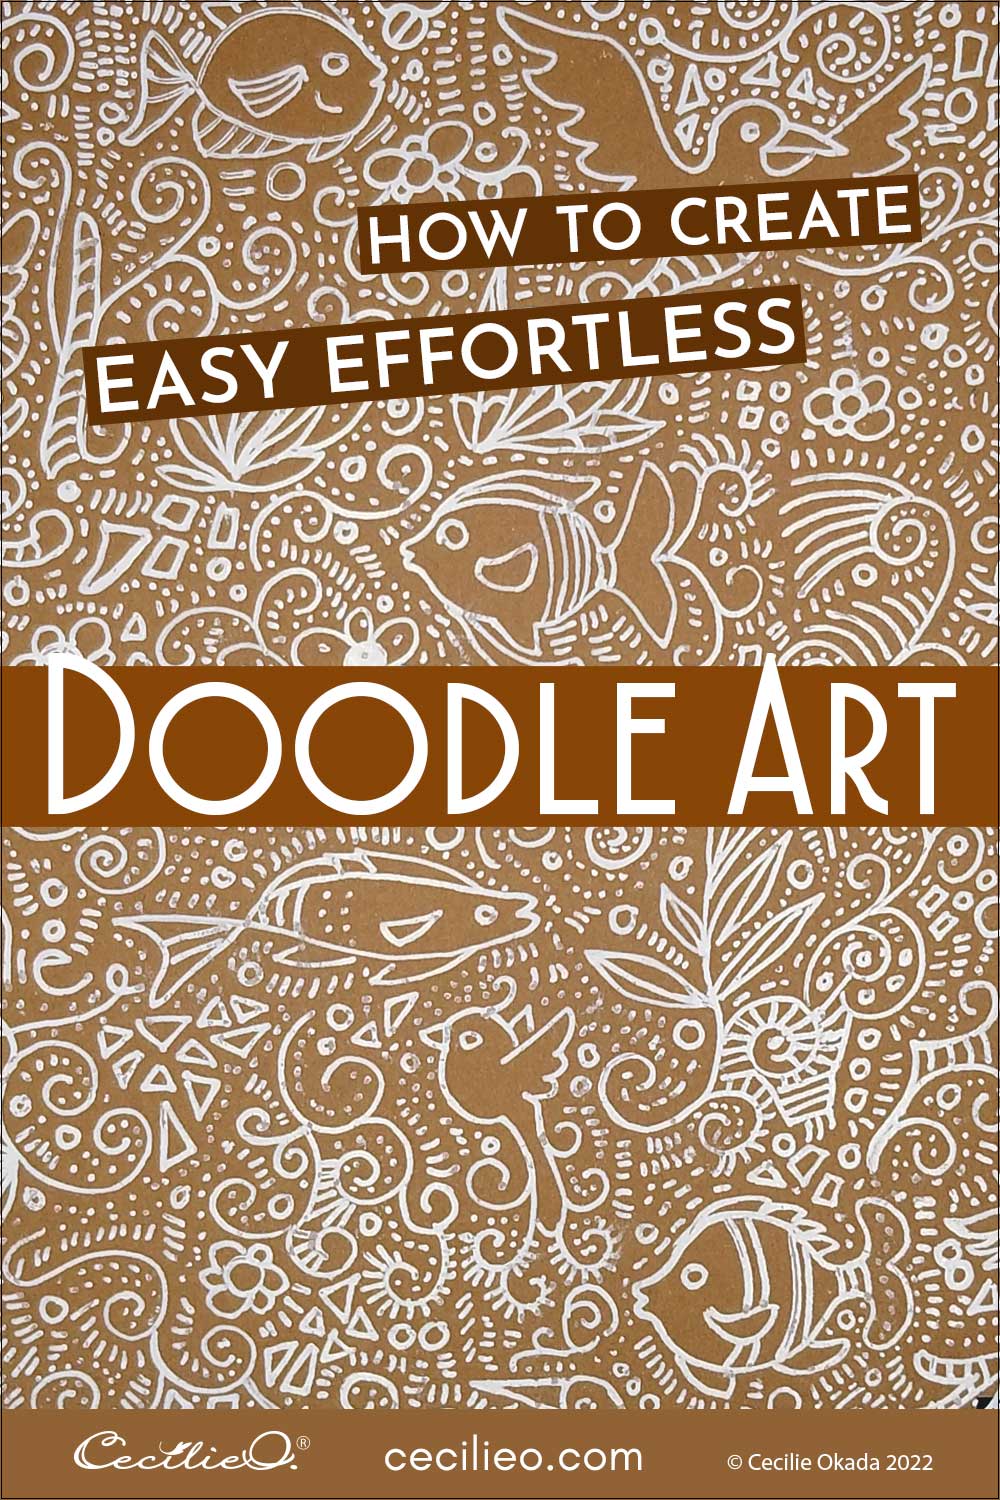 How to Effortlessly Create Easy Doodle Art